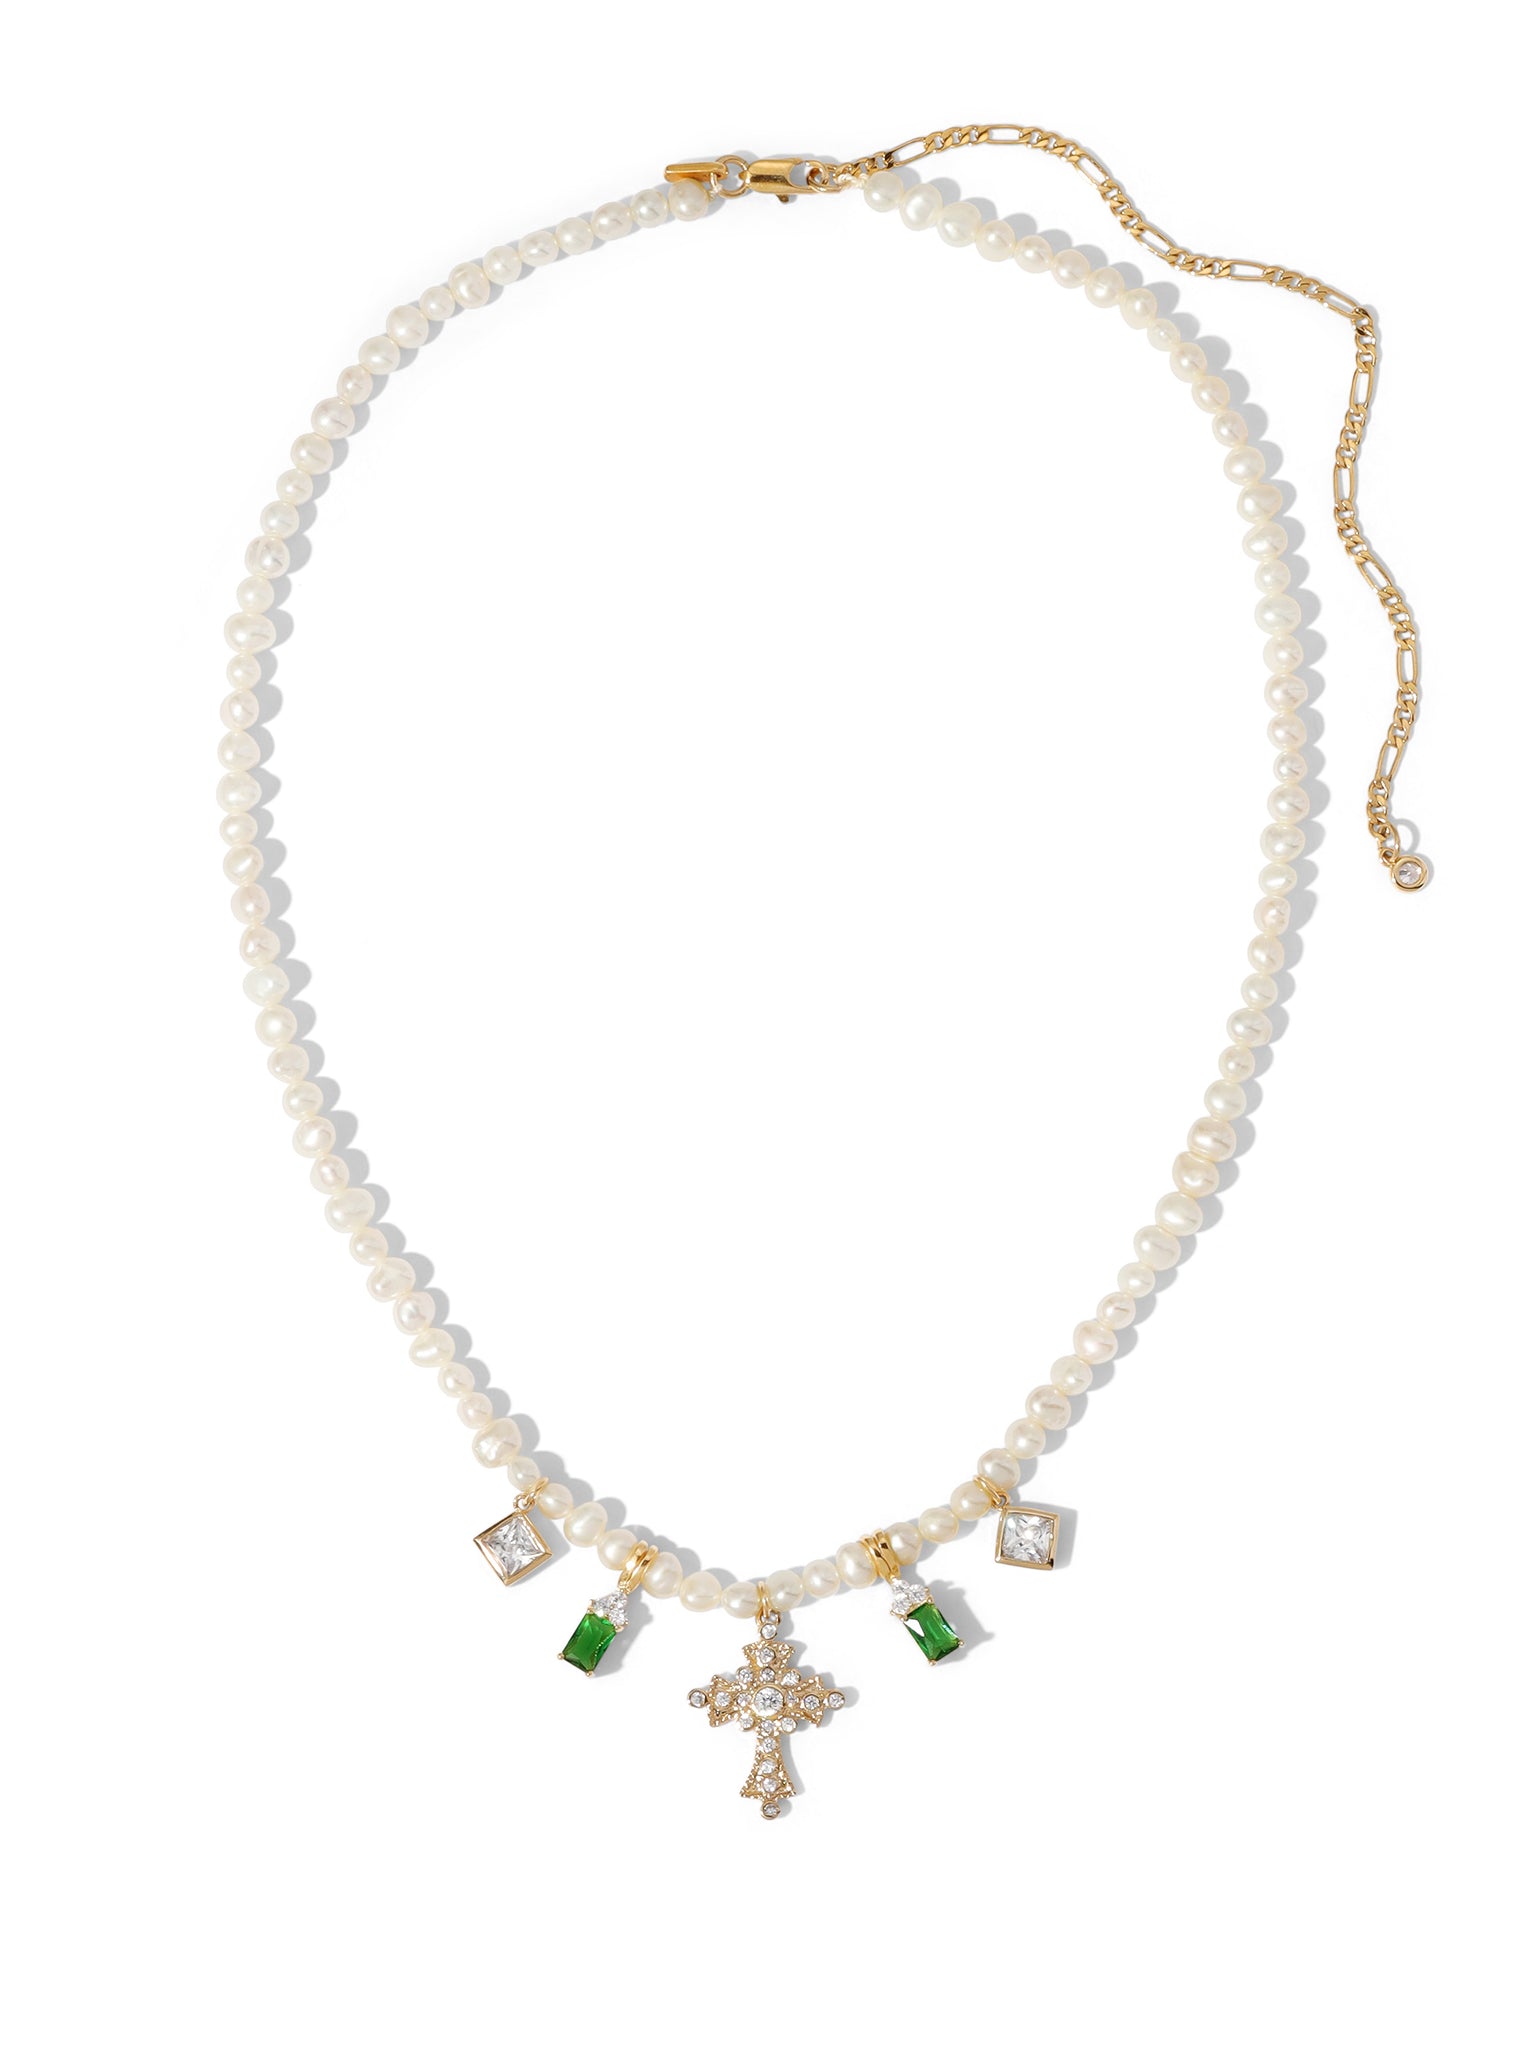 The Calloway Cross Necklace